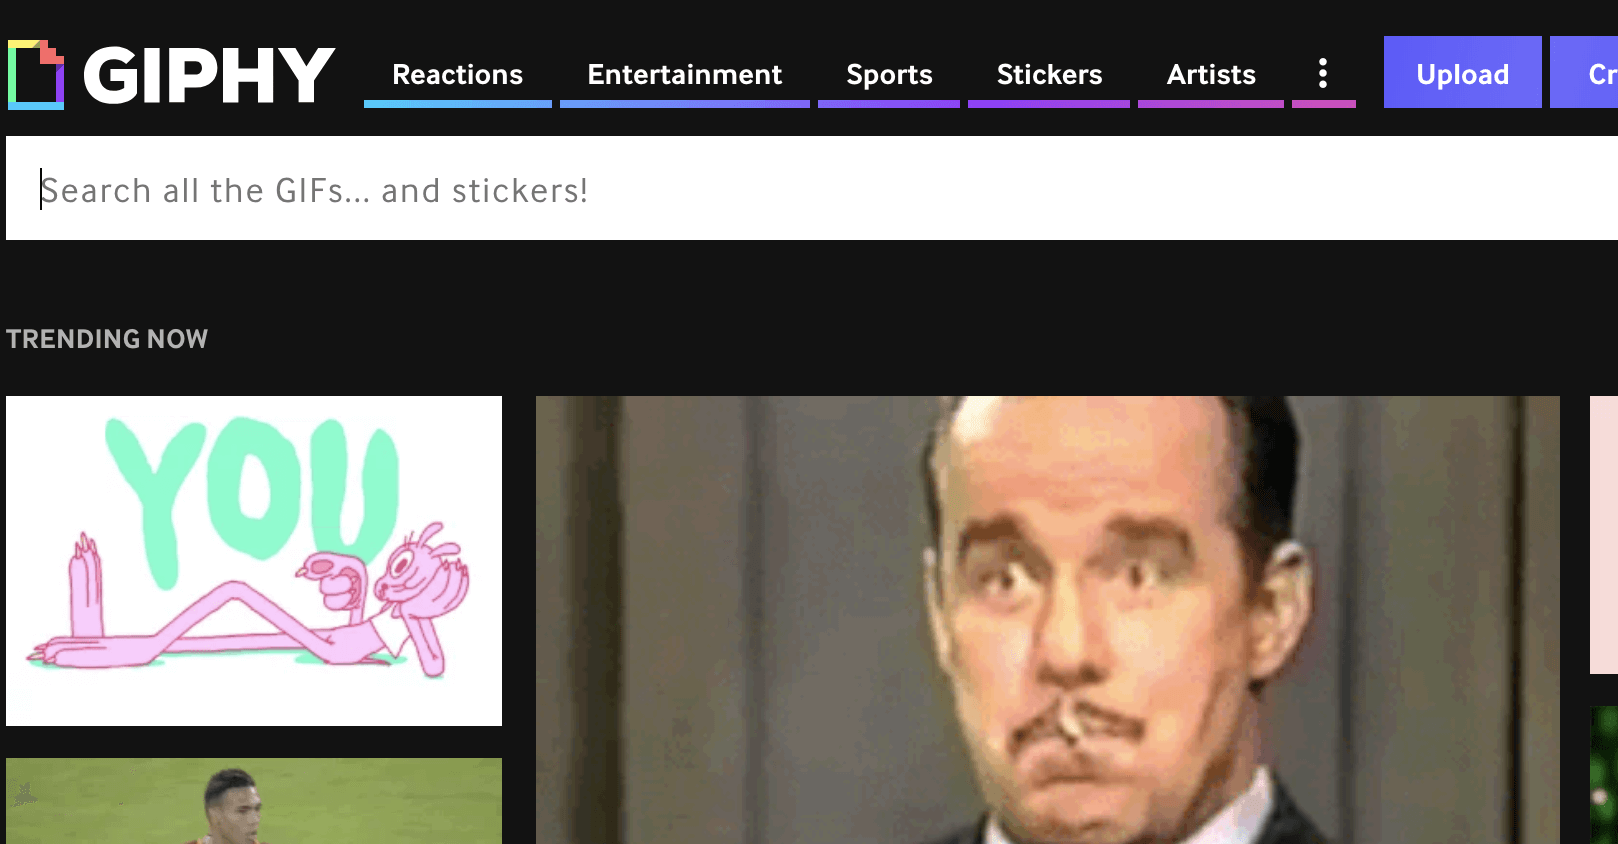 Giphy's website